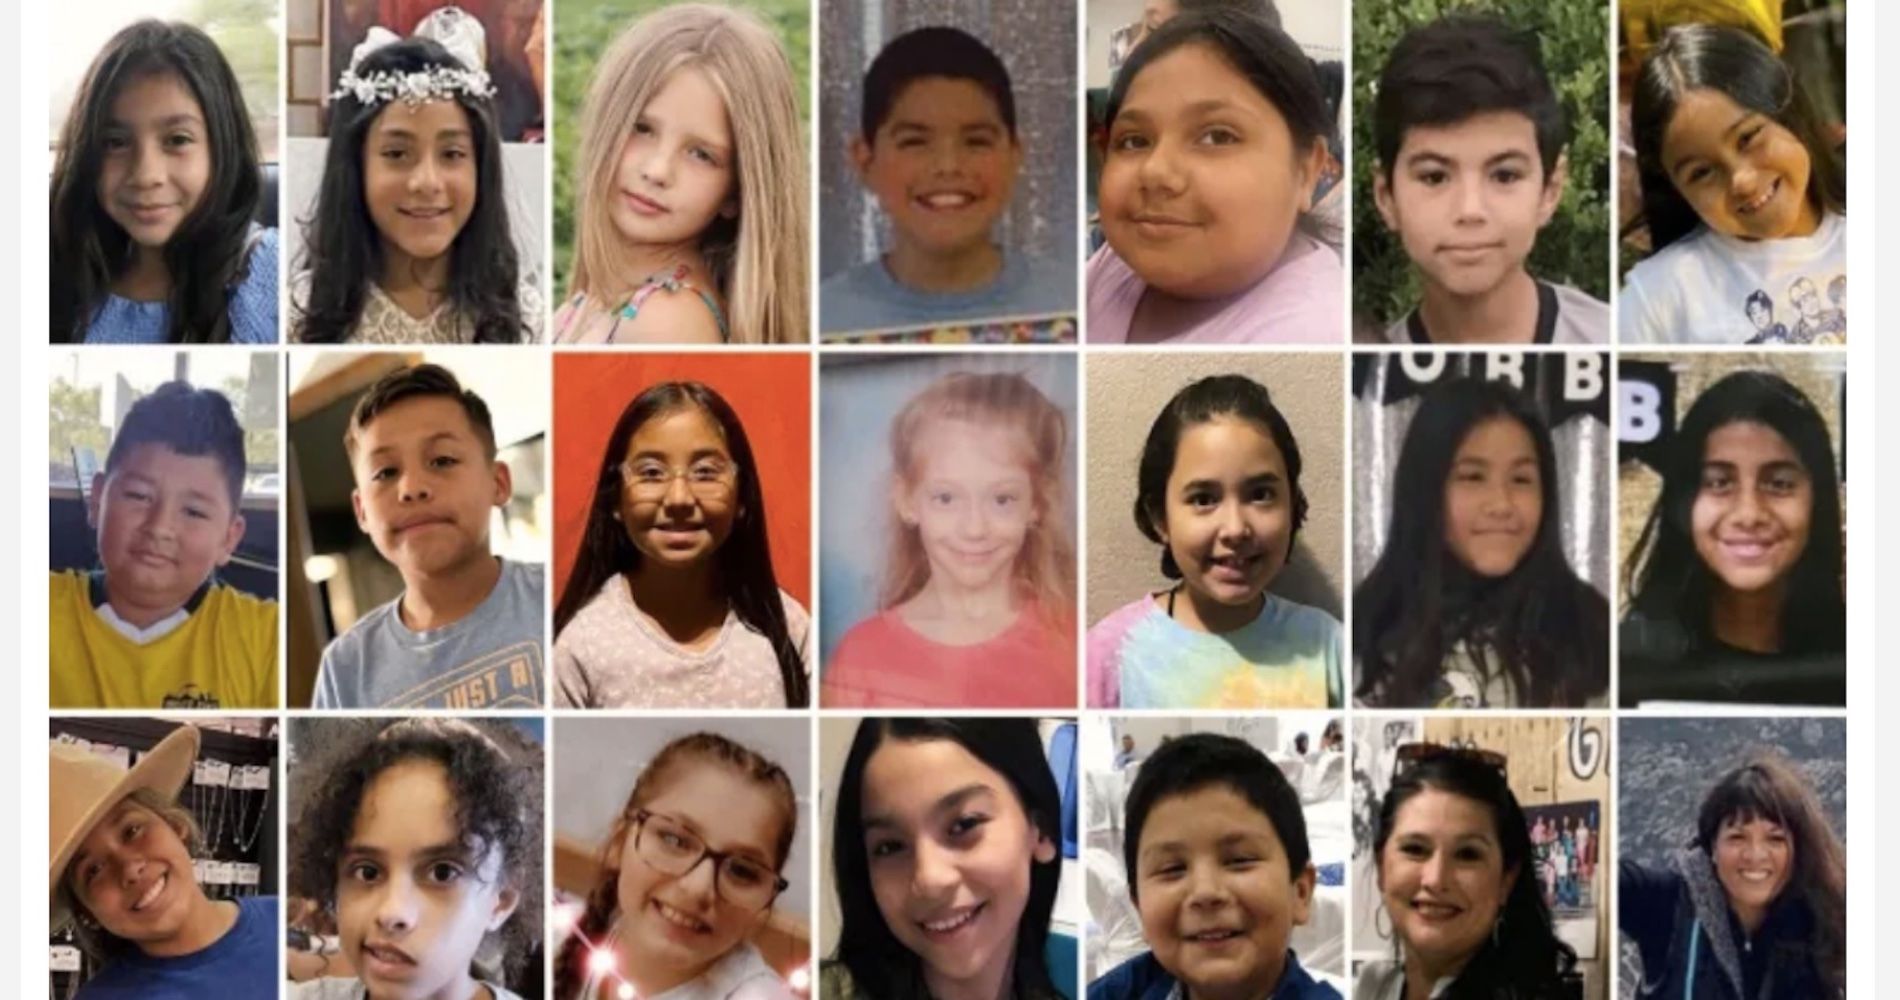 We Lovingly Remember the Victims of the Robb Elementary School Shooting—And Encourage You to Take Action